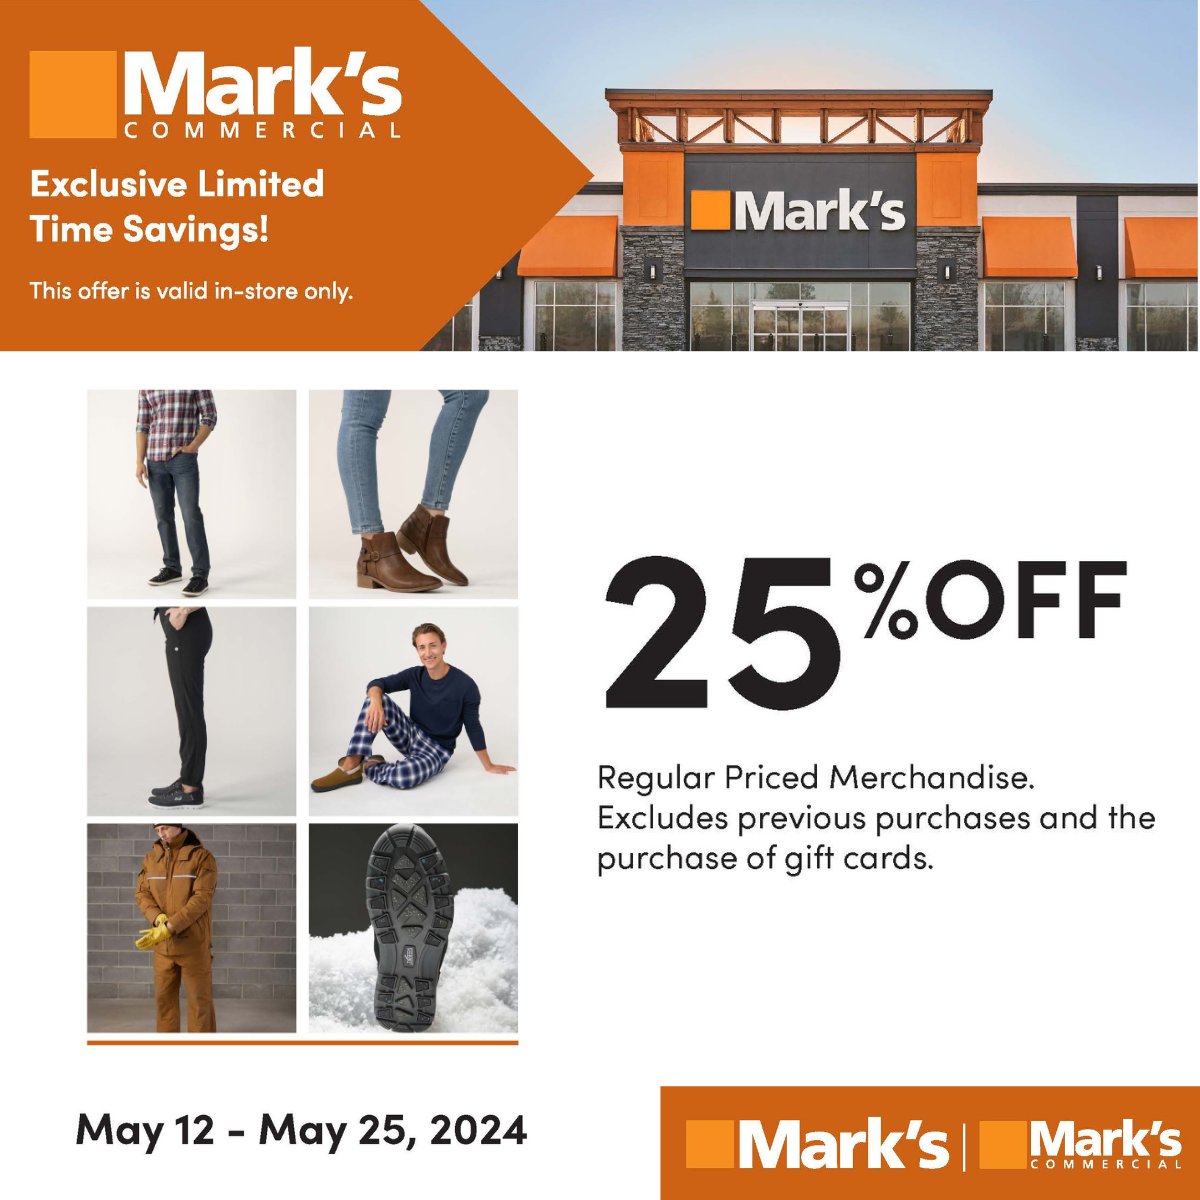 Mark's Commercial is offering #OACETT Members 25% off on regular-priced merchandise from May 12 to May 25, 2024. This offer is valid in-store only. 

Click here to get your discount